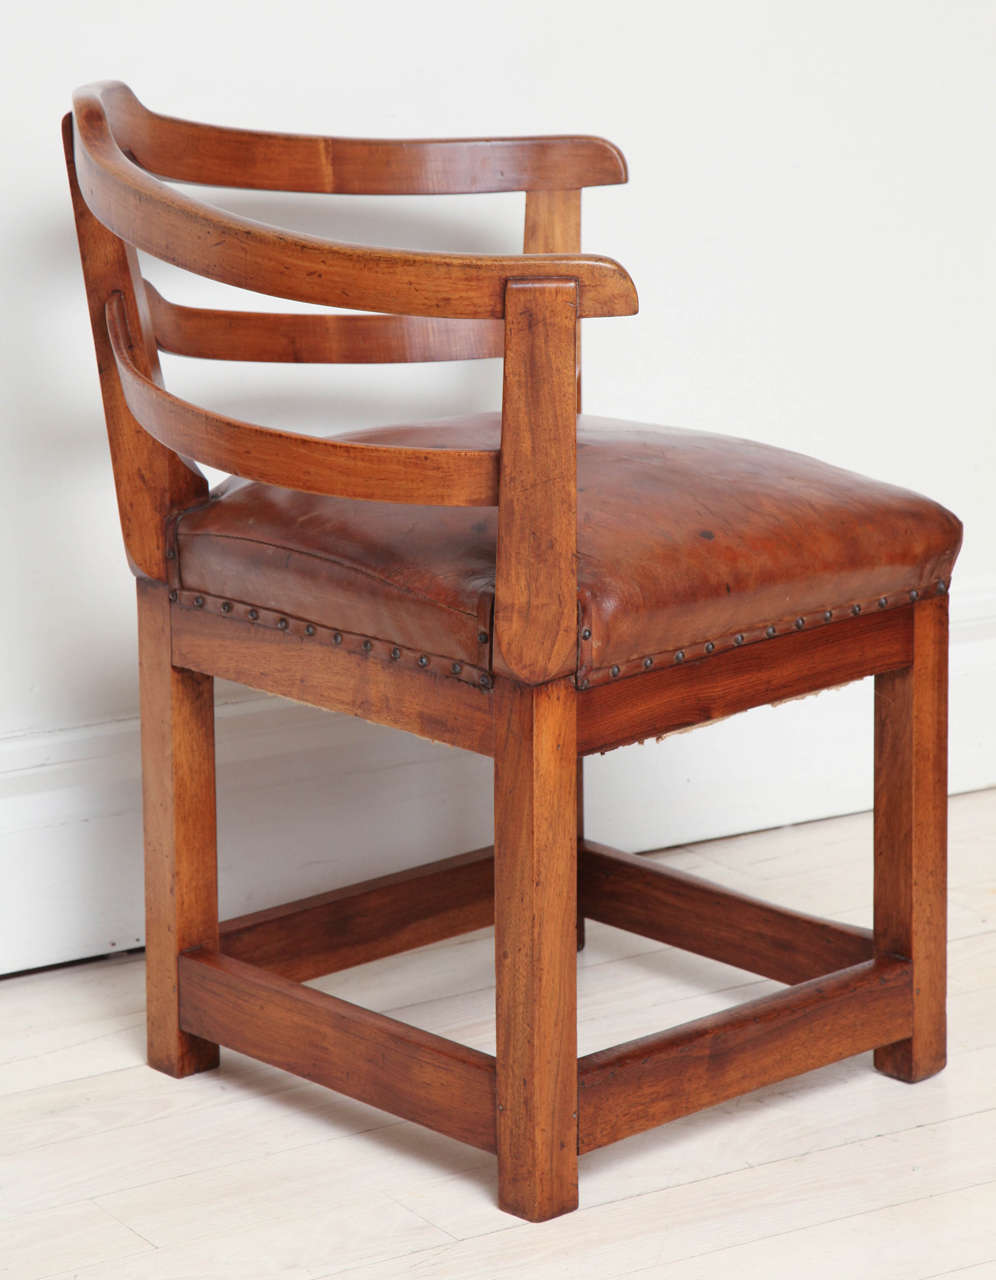 Early 19th Century French Walnut Corner Chair with Original Leather Seat 4